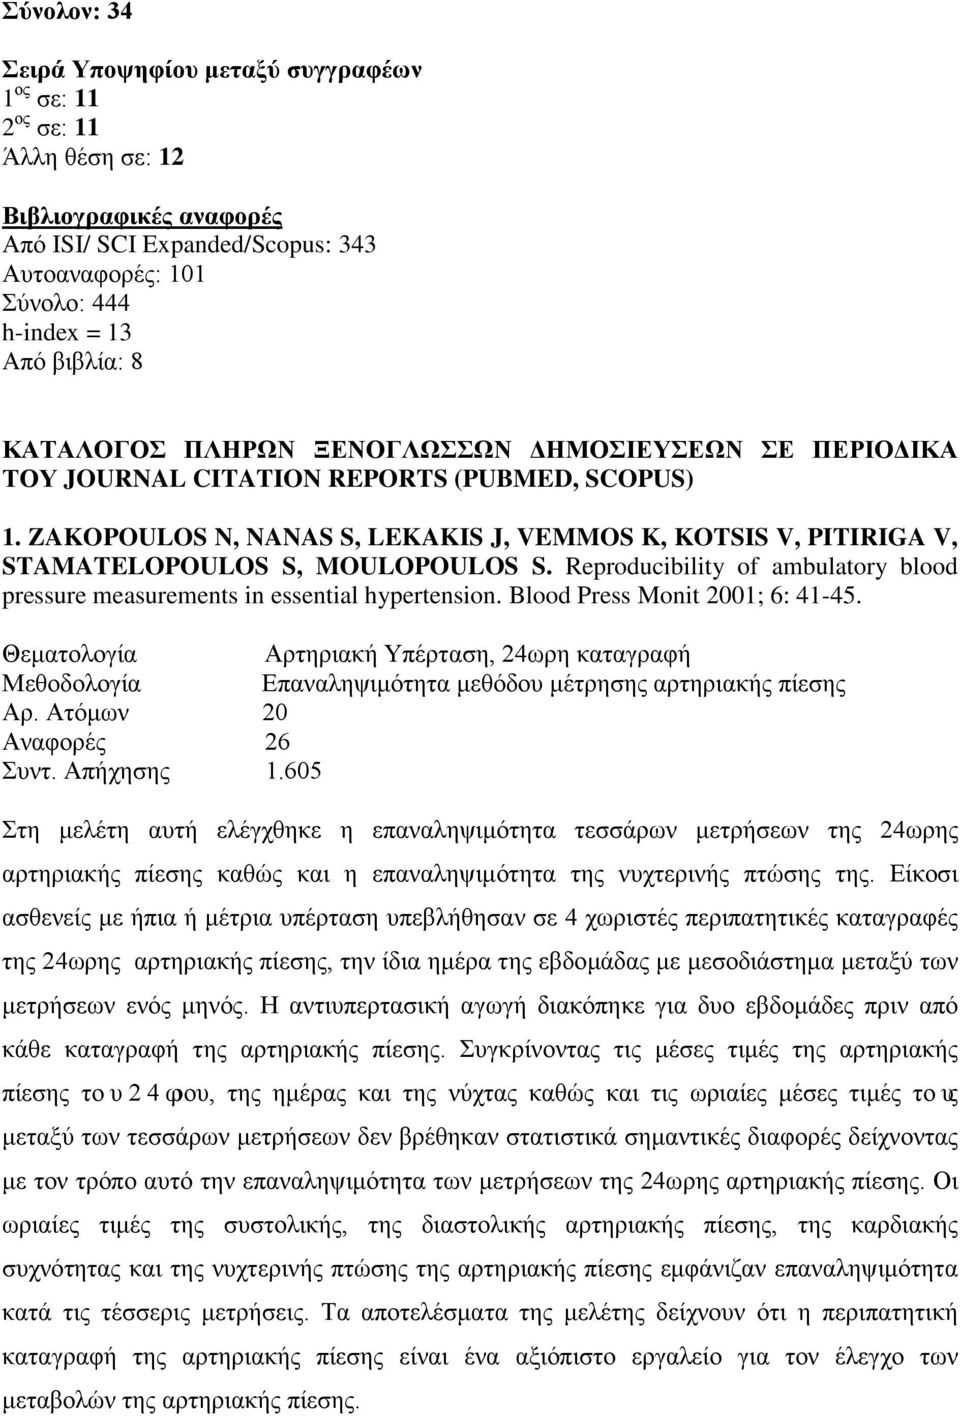 ZAKOPOULOS N, NANAS S, LEKAKIS J, VEMMOS K, KOTSIS V, PITIRIGA V, STAMATELOPOULOS S, MOULOPOULOS S. Reproducibility of ambulatory blood pressure measurements in essential hypertension.